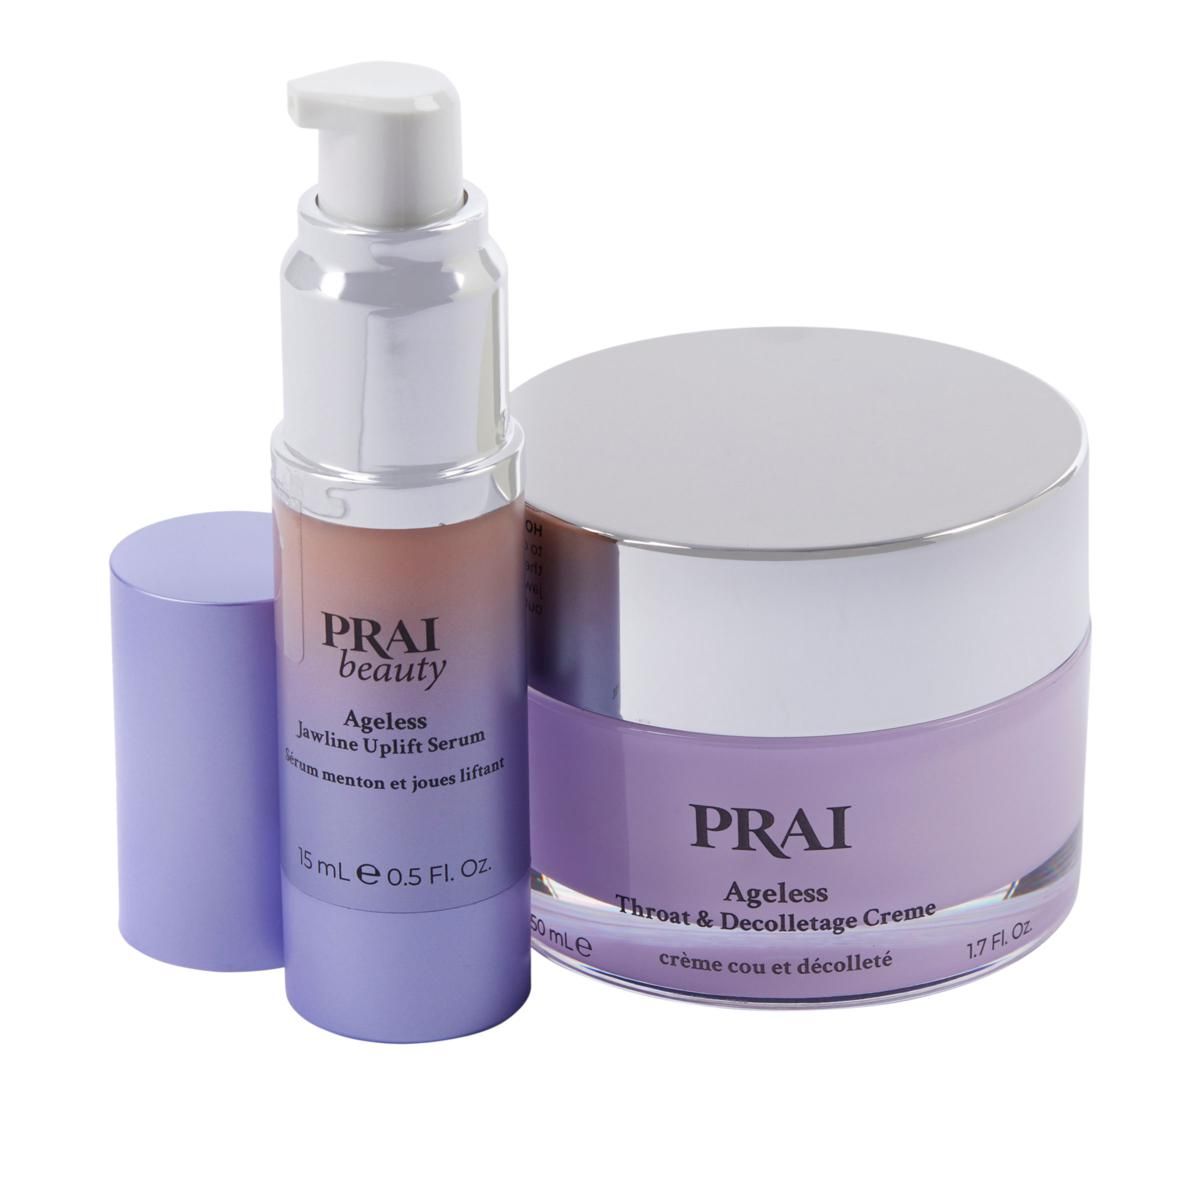 PRAI Beauty Ageless Jawline and Throat & Decolletage Creme Try Me Kit | HSN